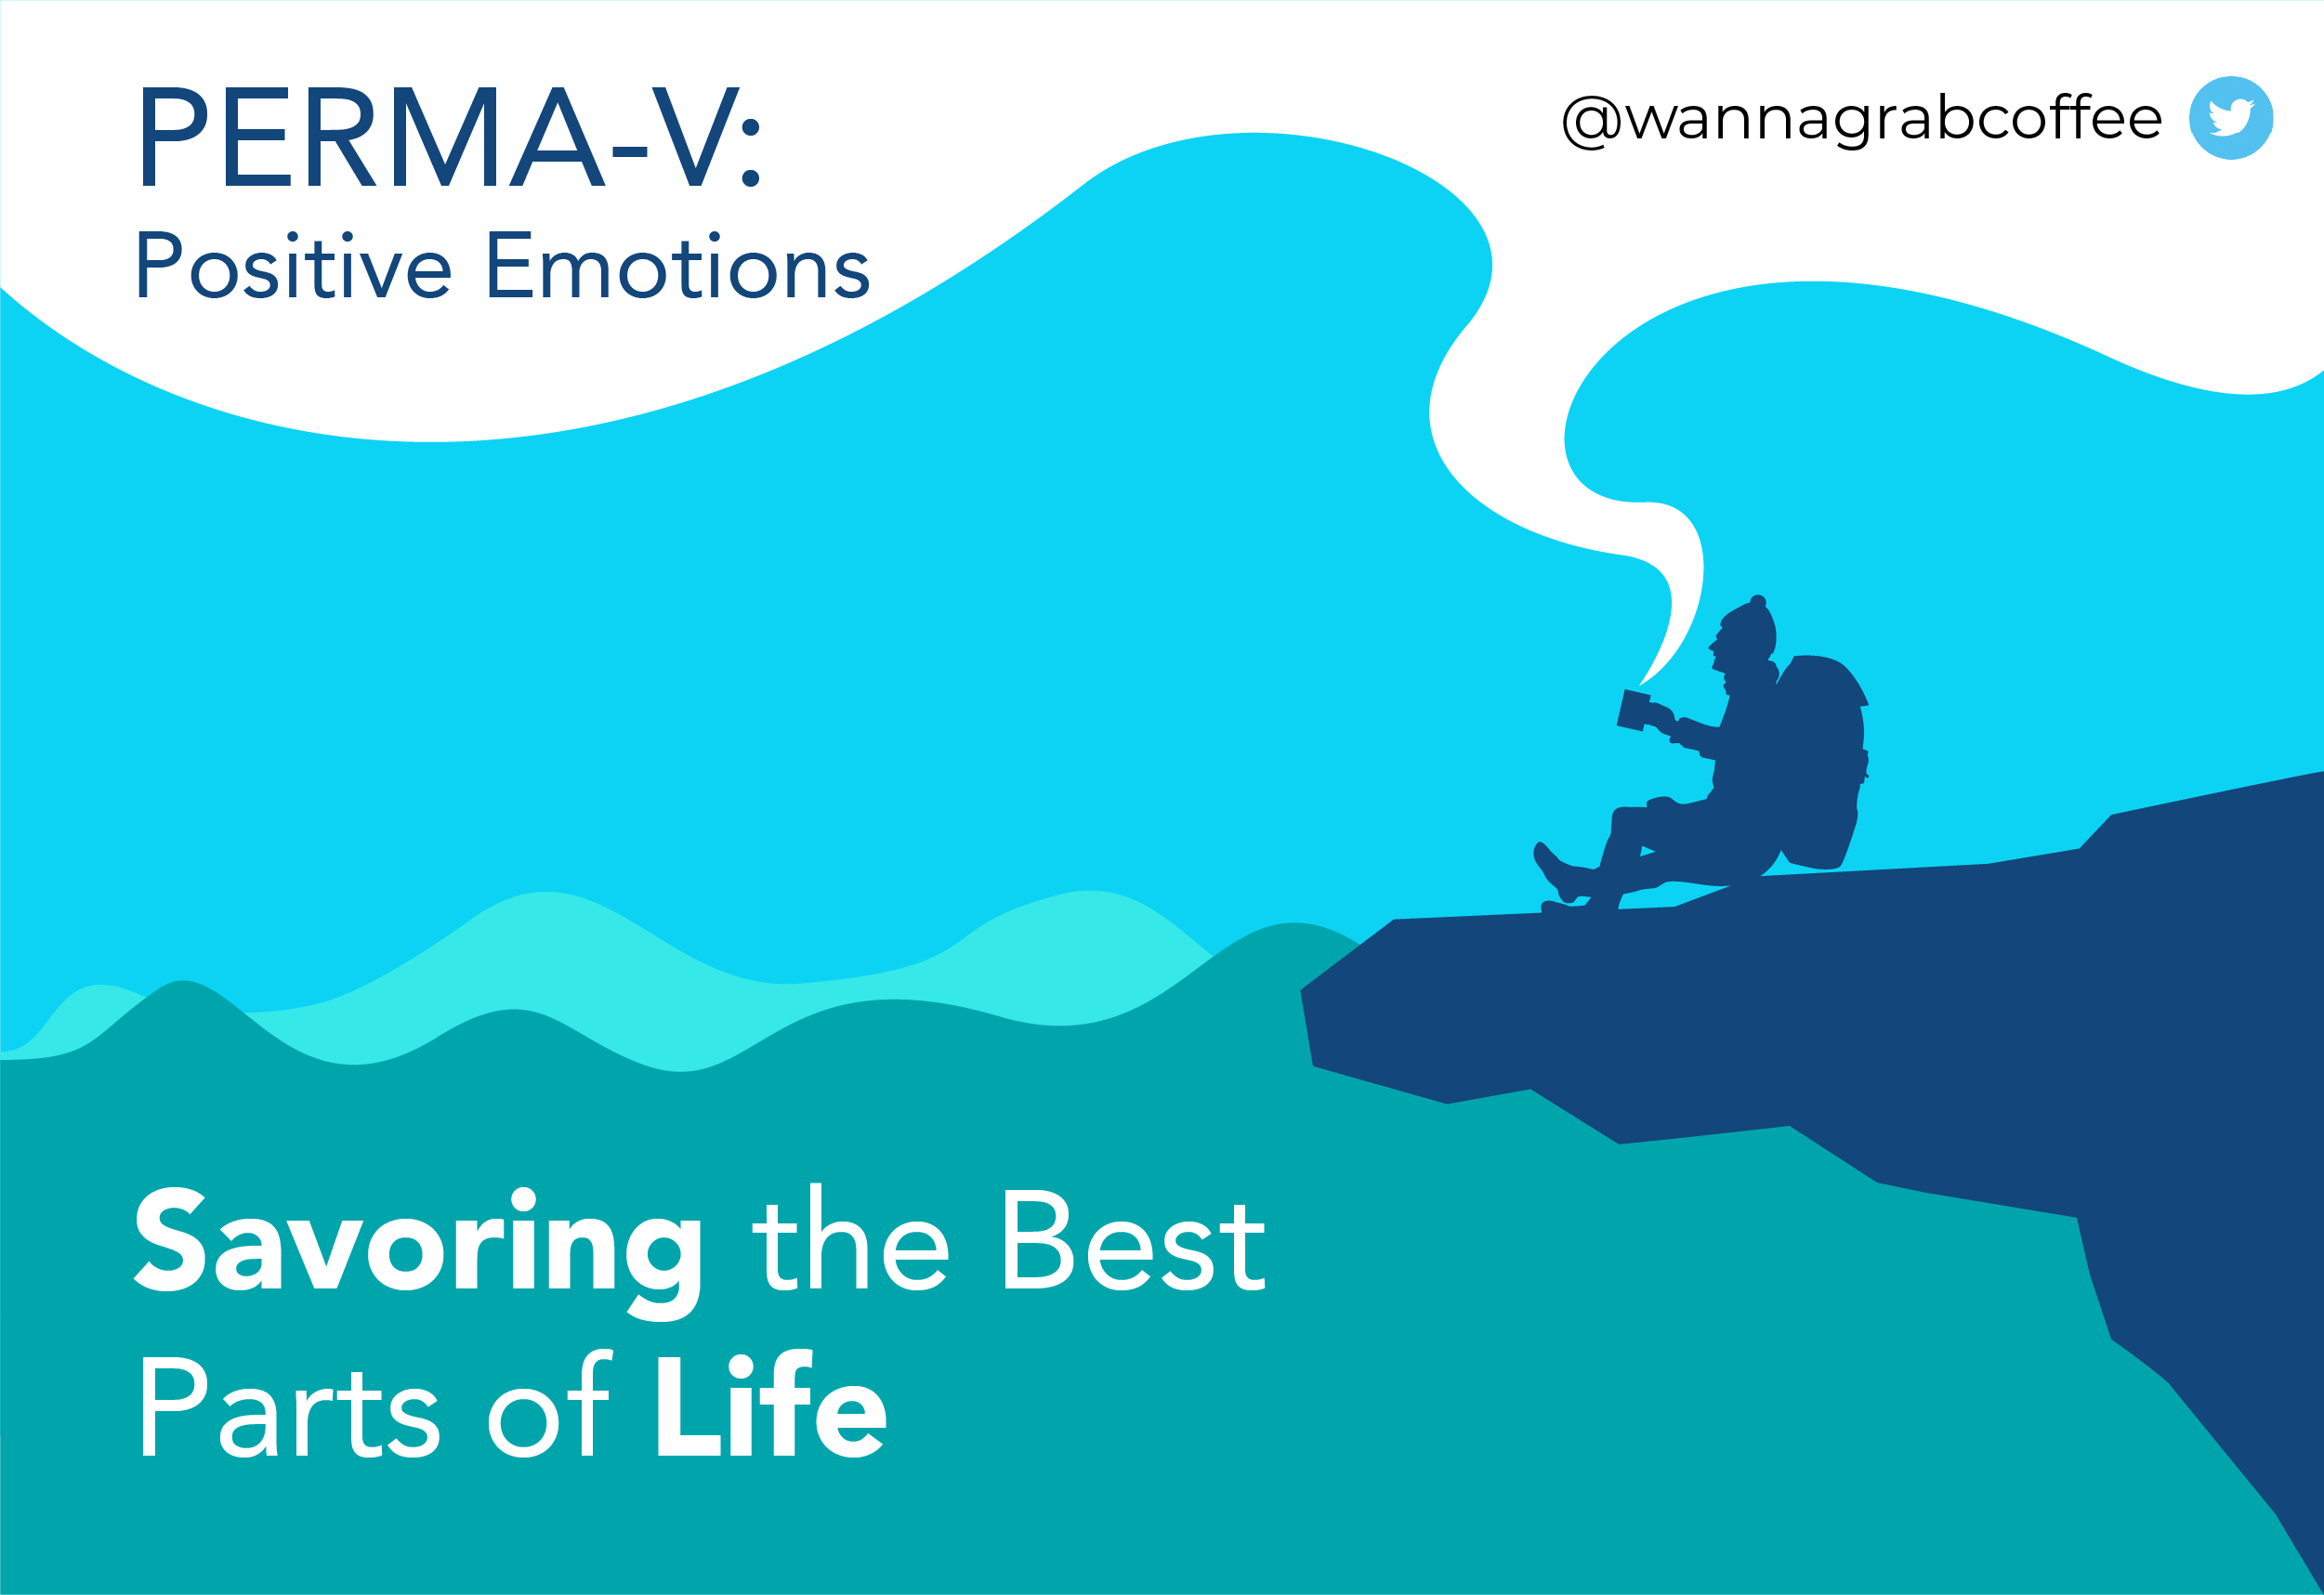 PERMA-V: Positive Emotions and Savoring the Best Parts of Life